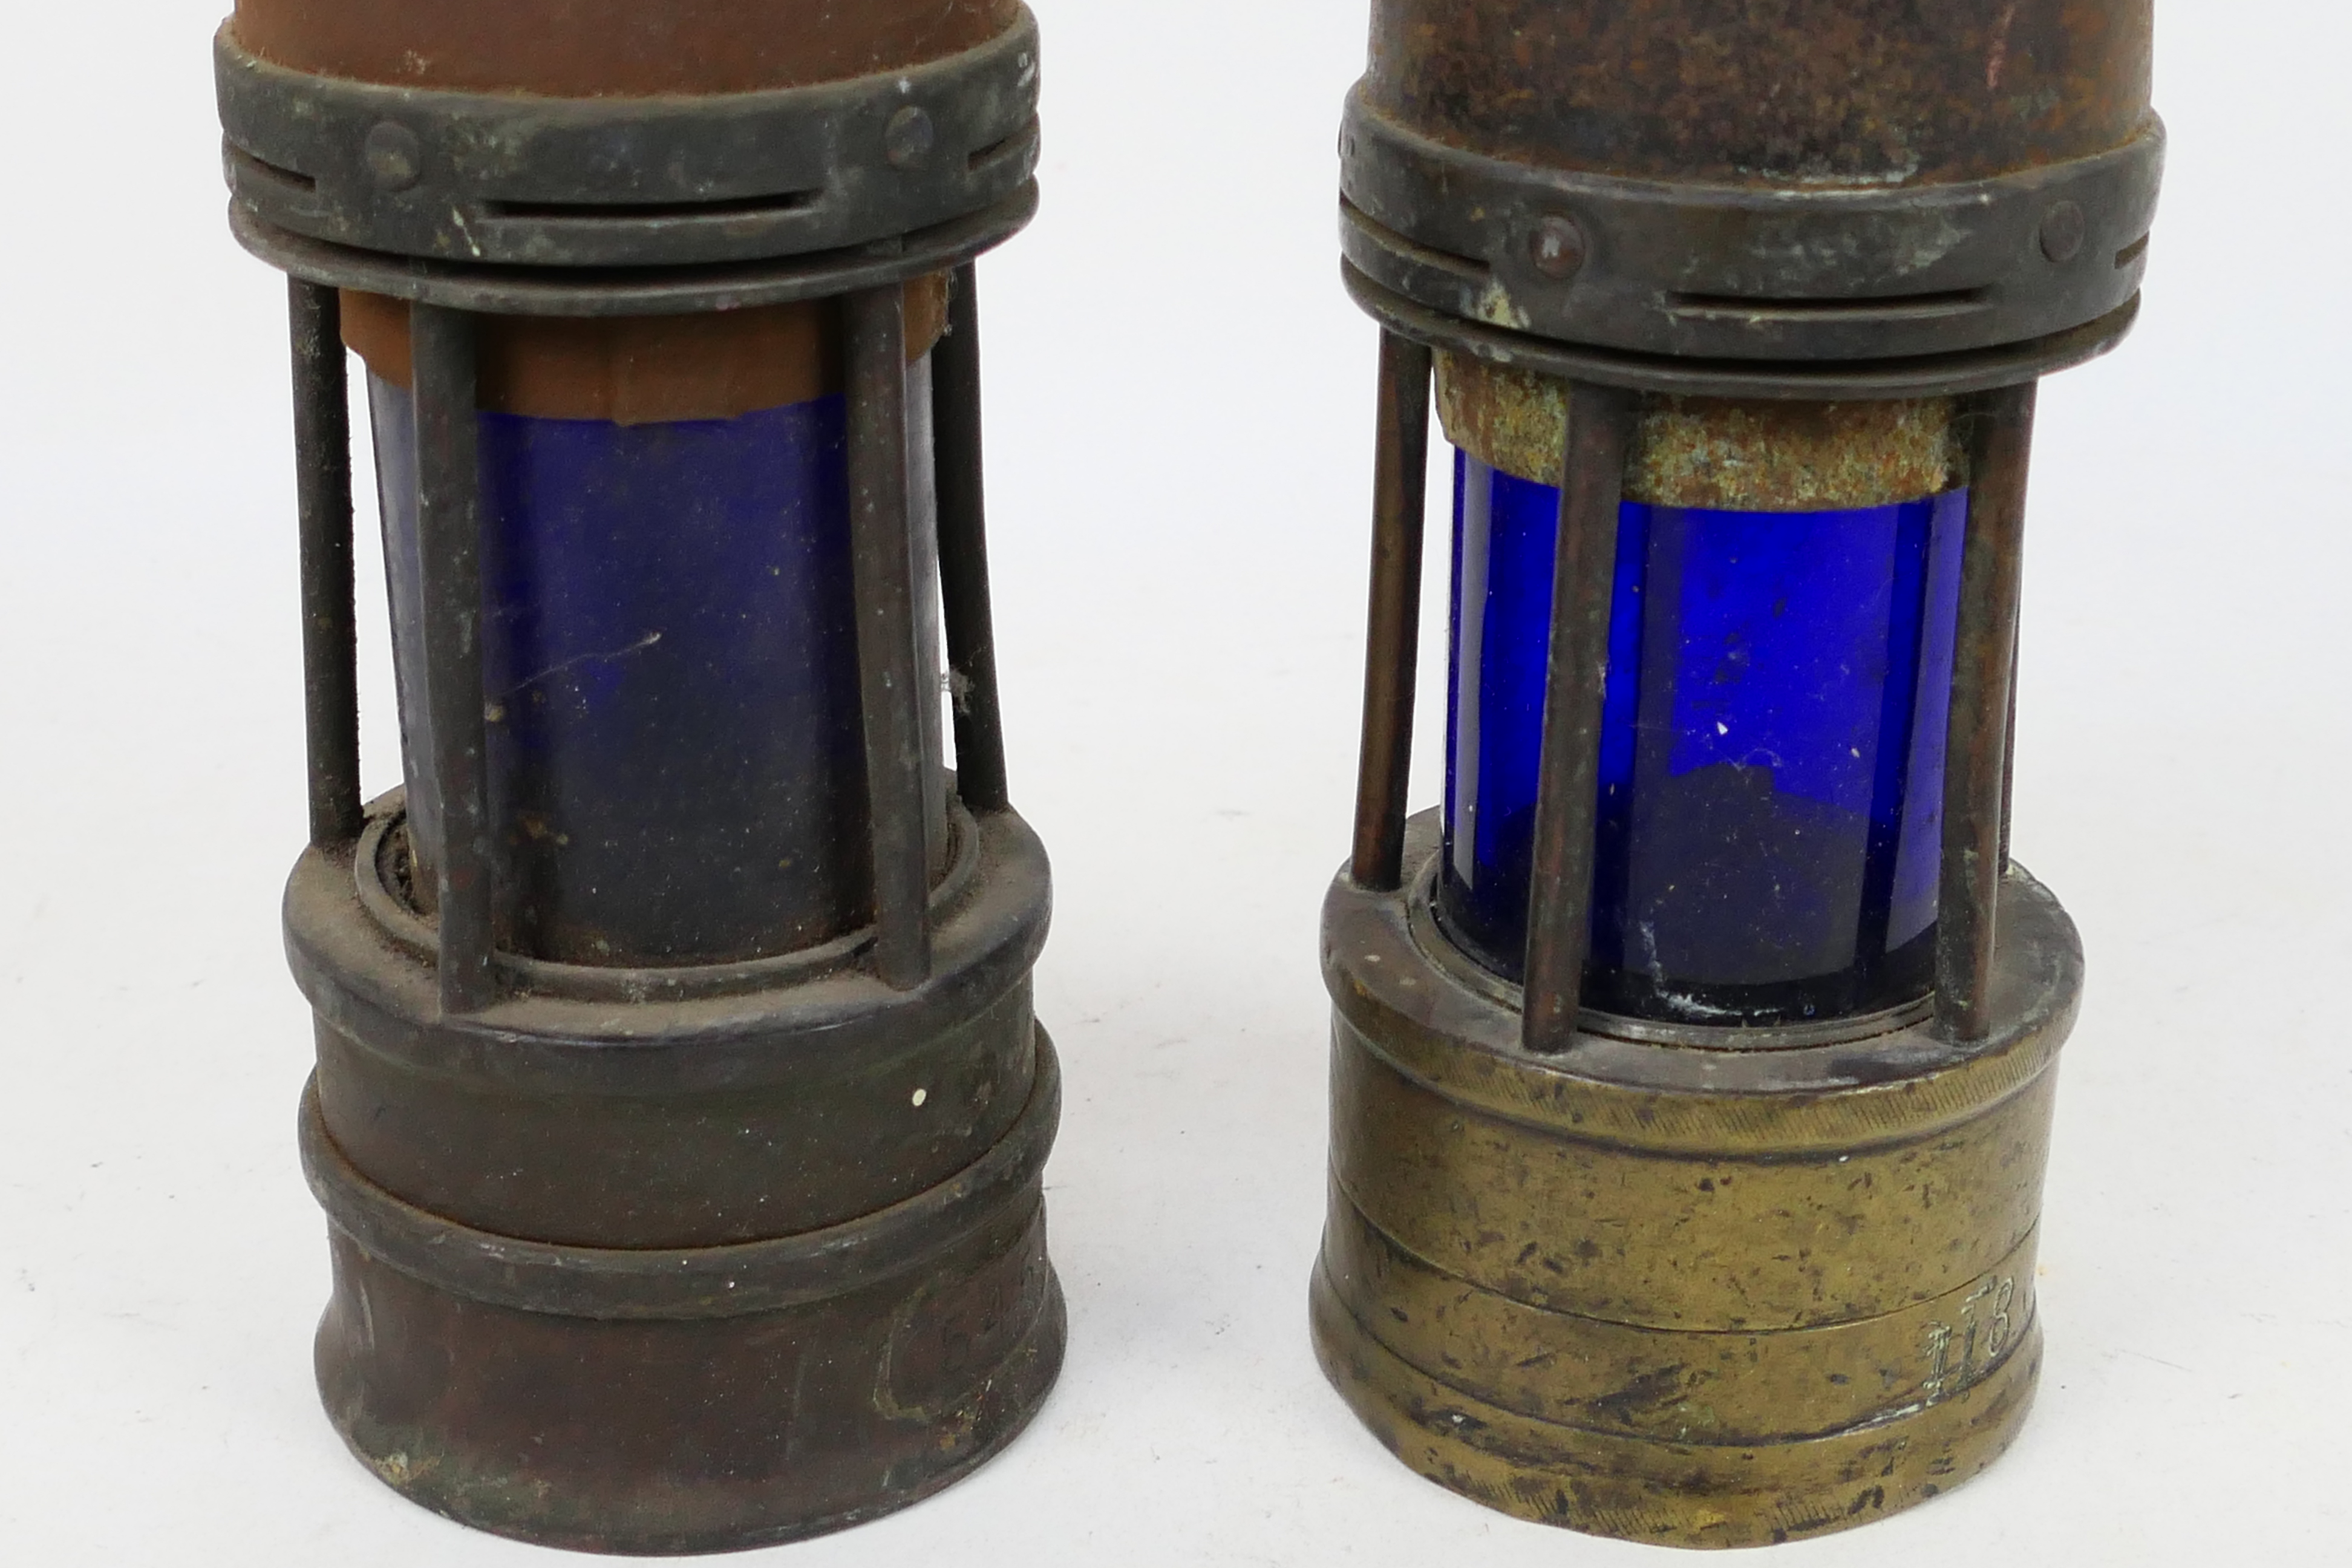 Two Ackroyd & Best Hailwoods safety lamp, approximately 26 cm (h) excluding handle. - Image 4 of 5